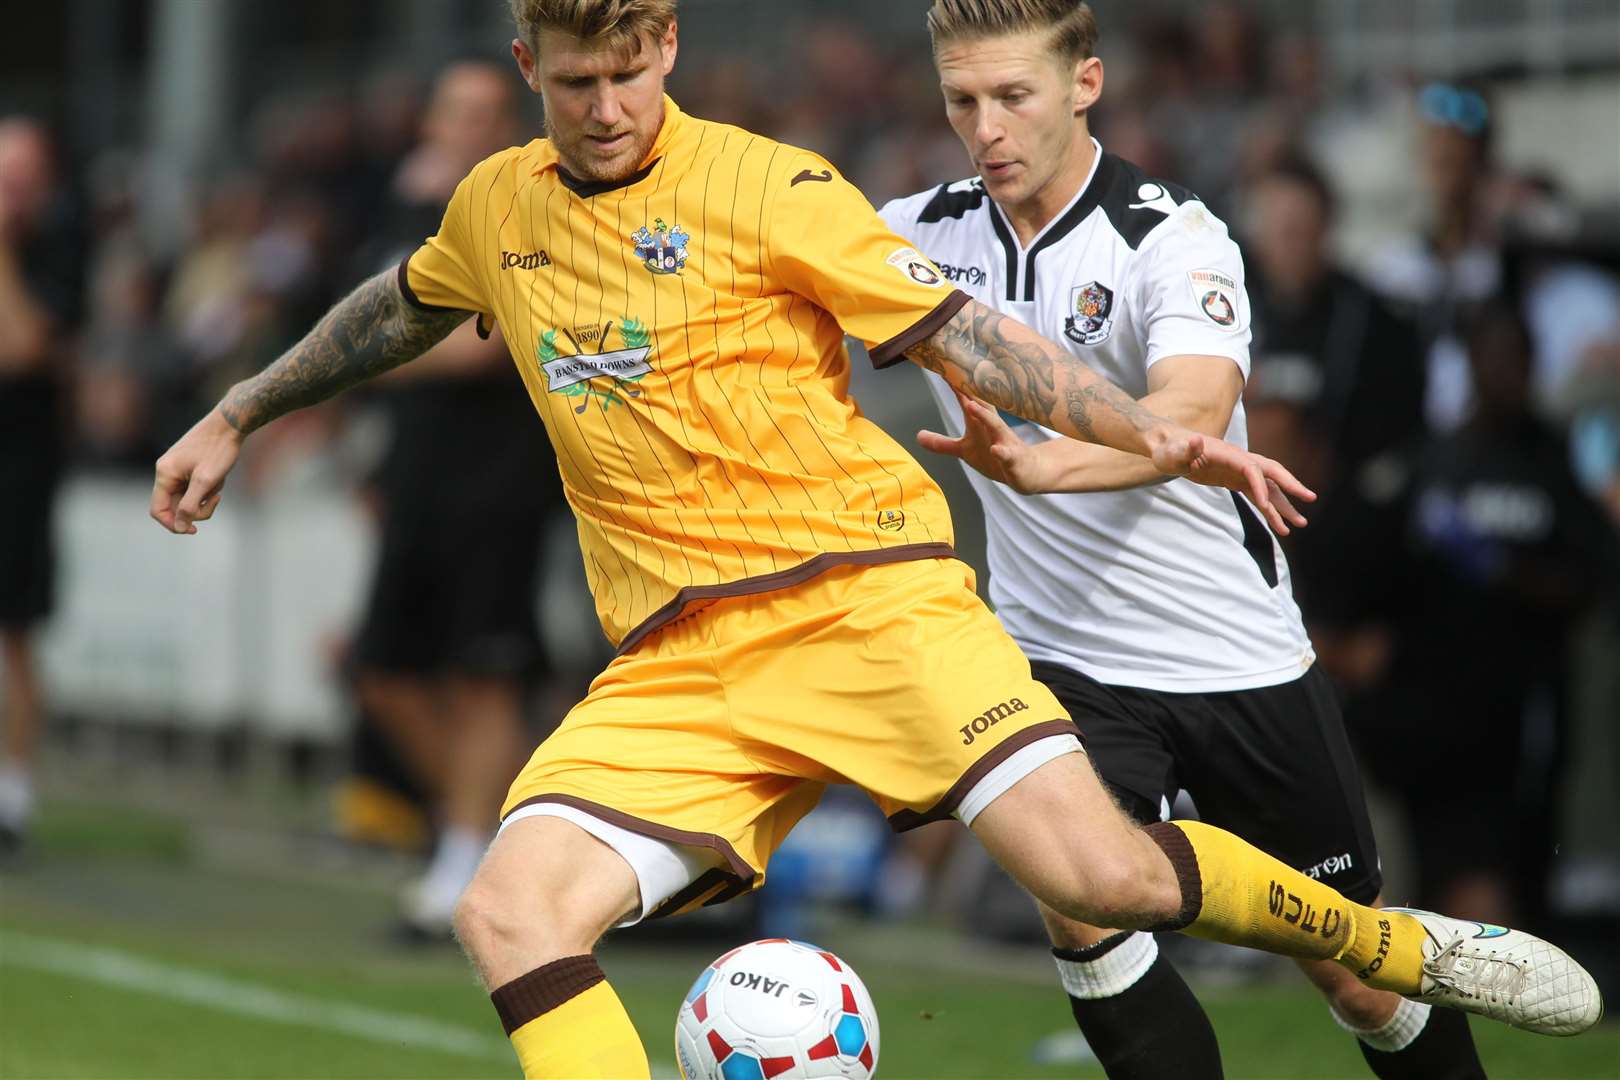 Dean Beckwith in action for Sutton United Picture: John Westhrop